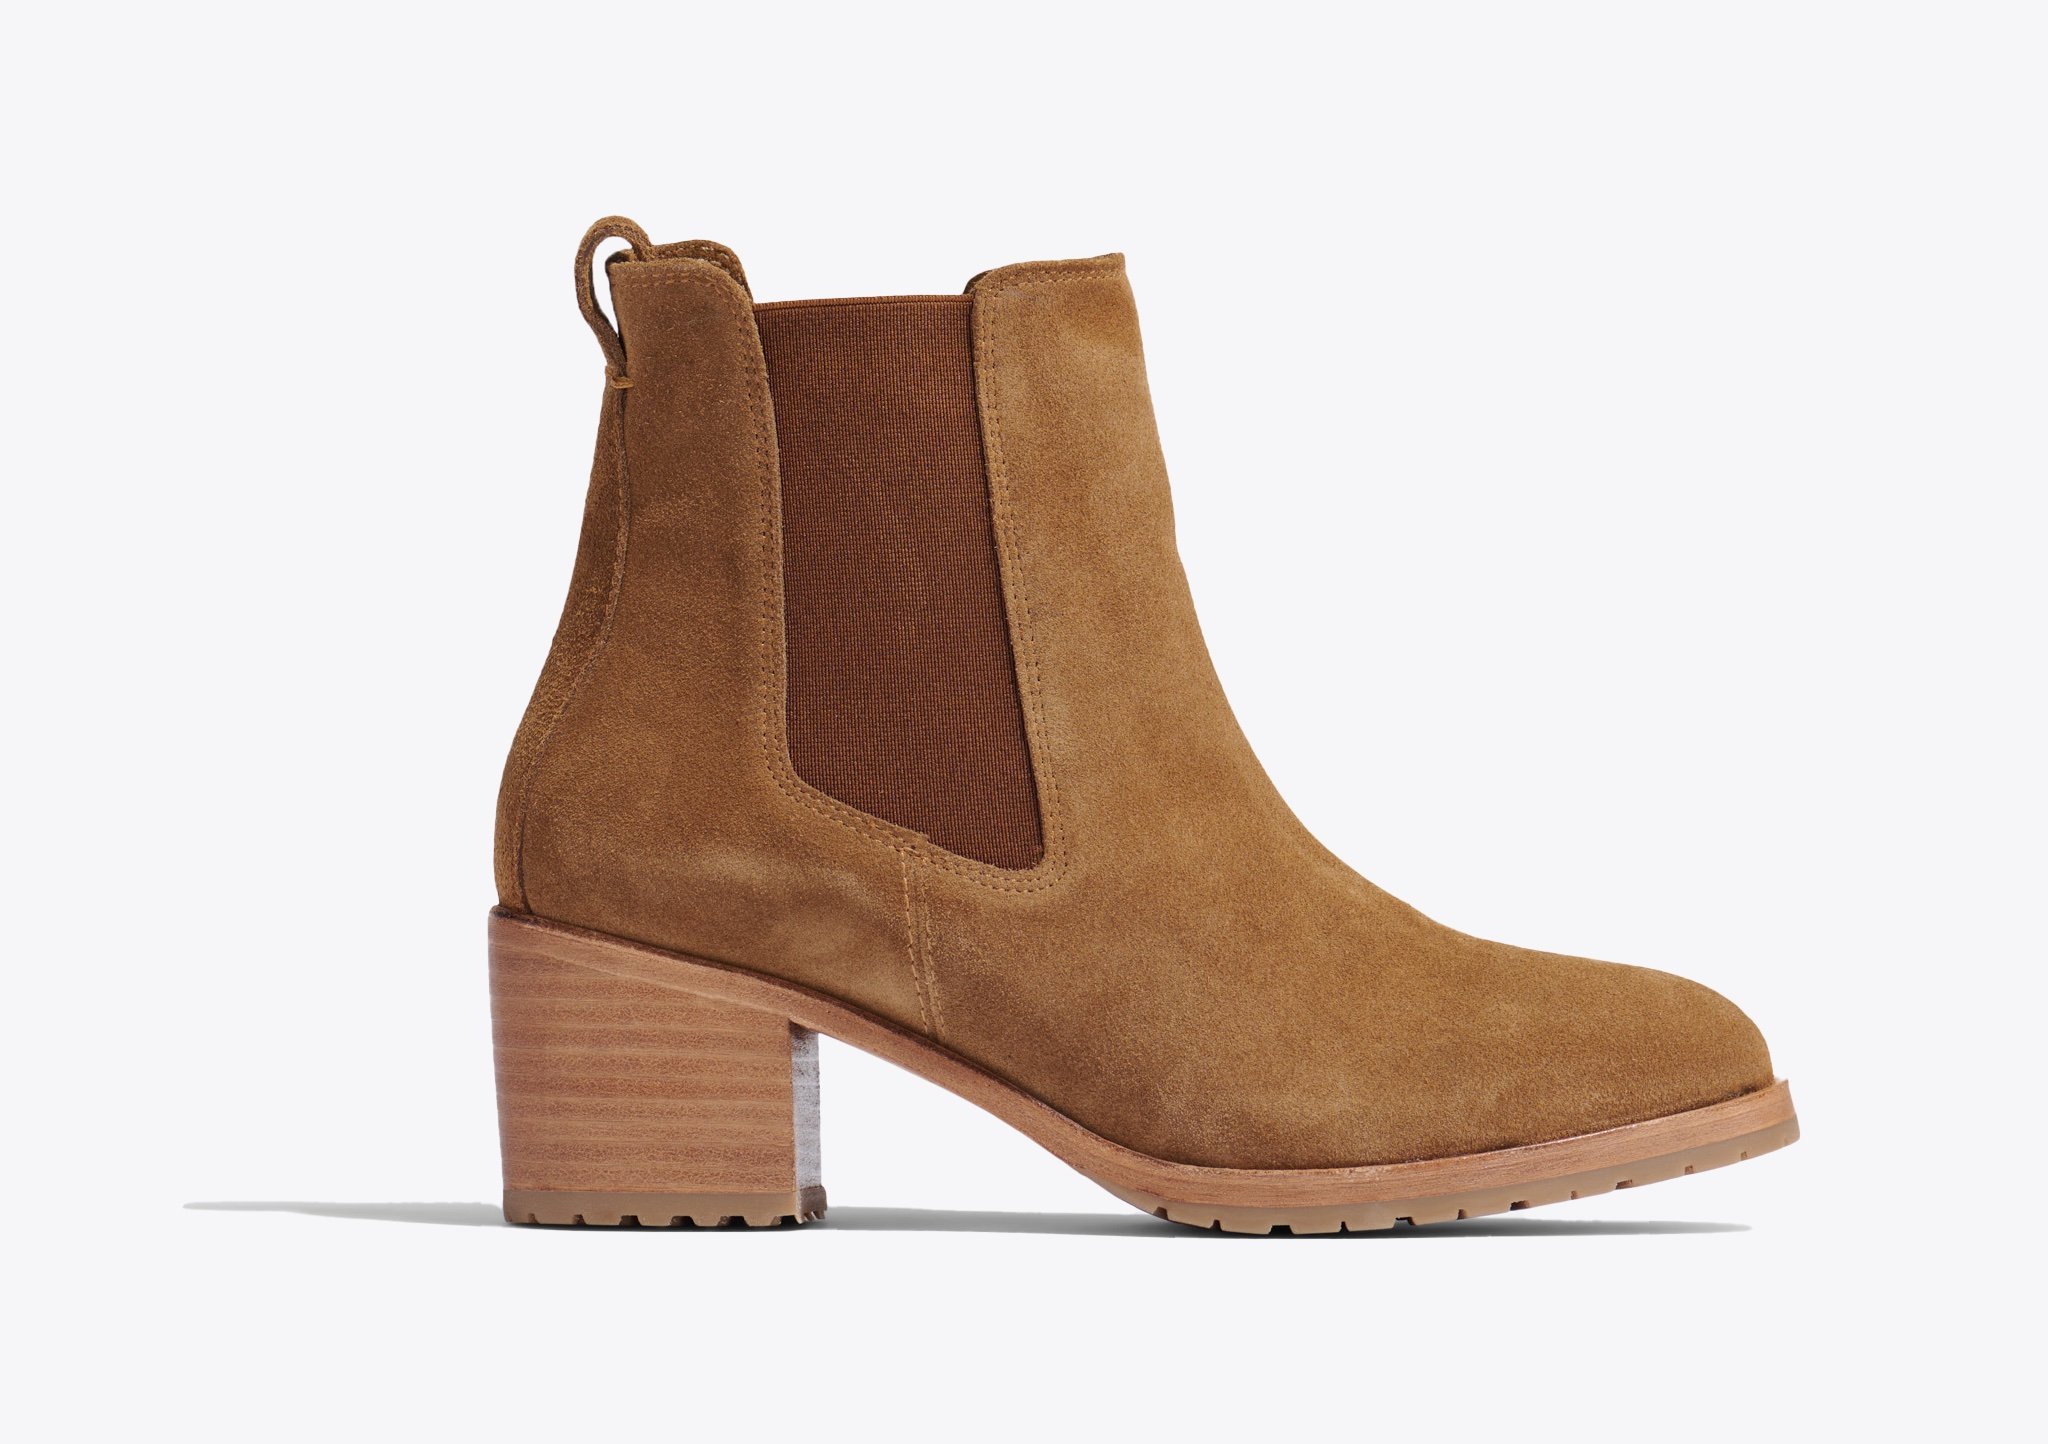 Nisolo Ana Go-To Heeled Chelsea Boot Taupe Suede - Every Nisolo product is built on the foundation of comfort, function, and design. 